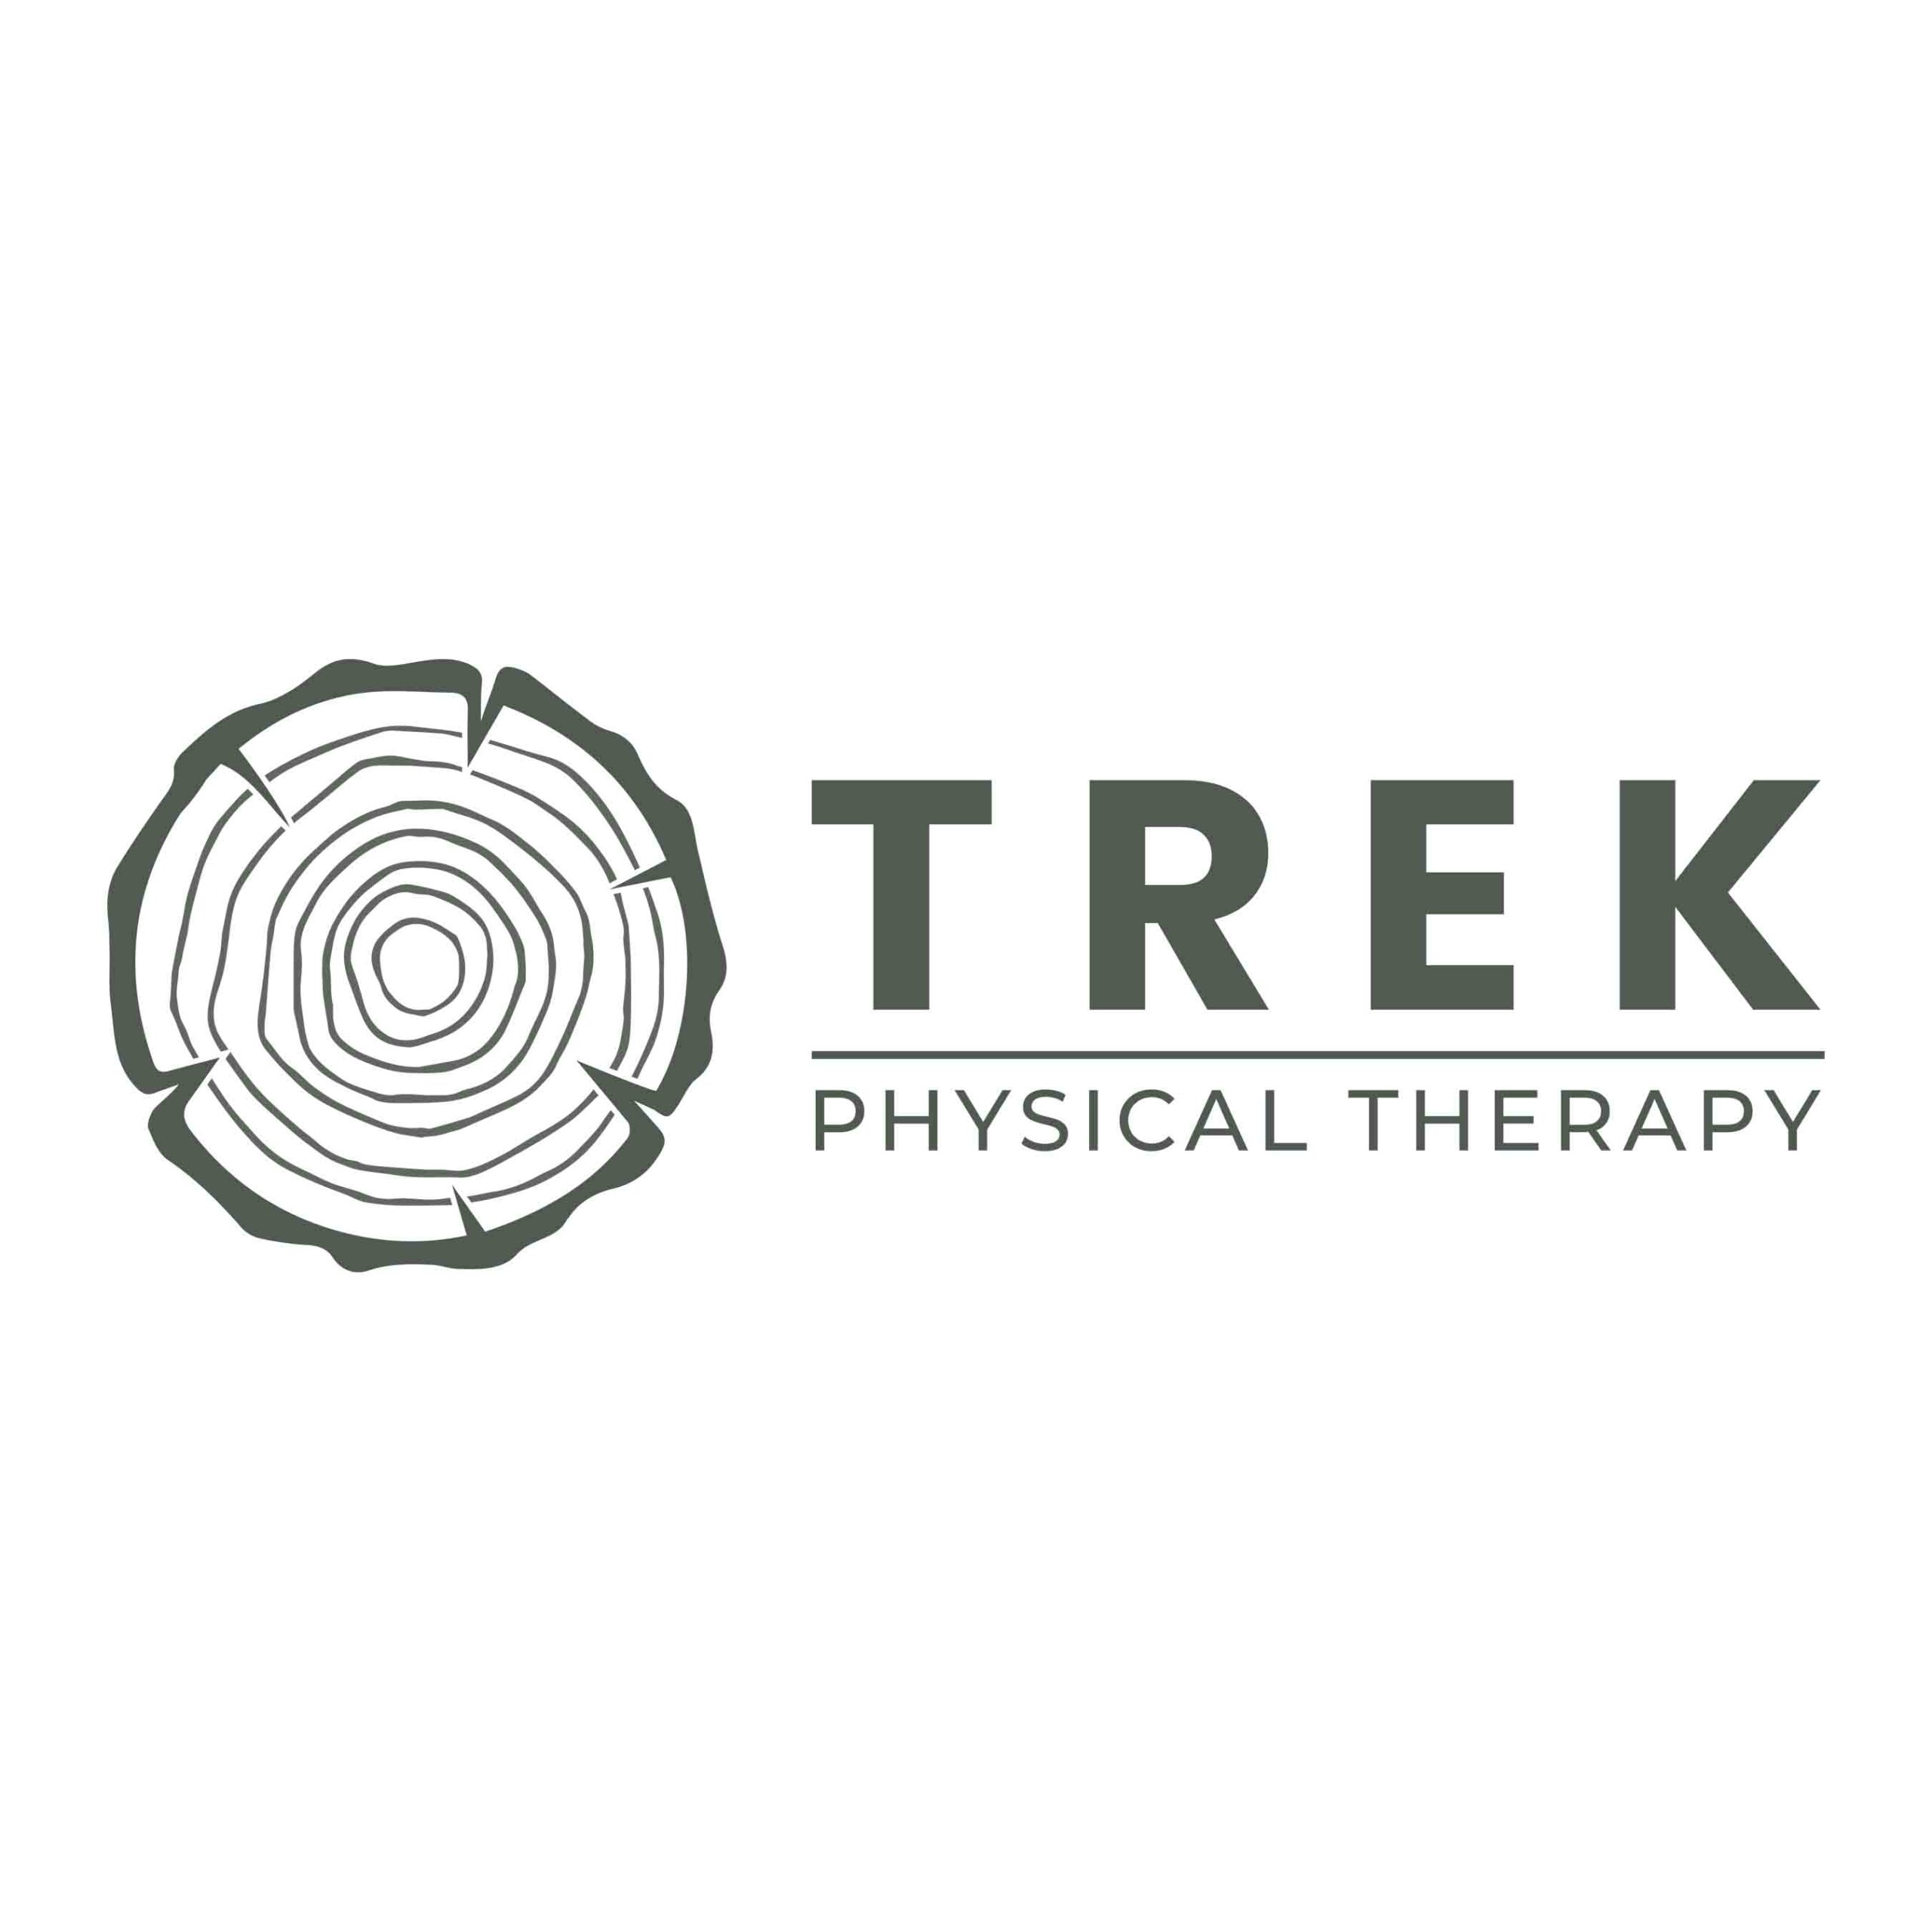 Trek Physical Therapy in McMinnville Oregon